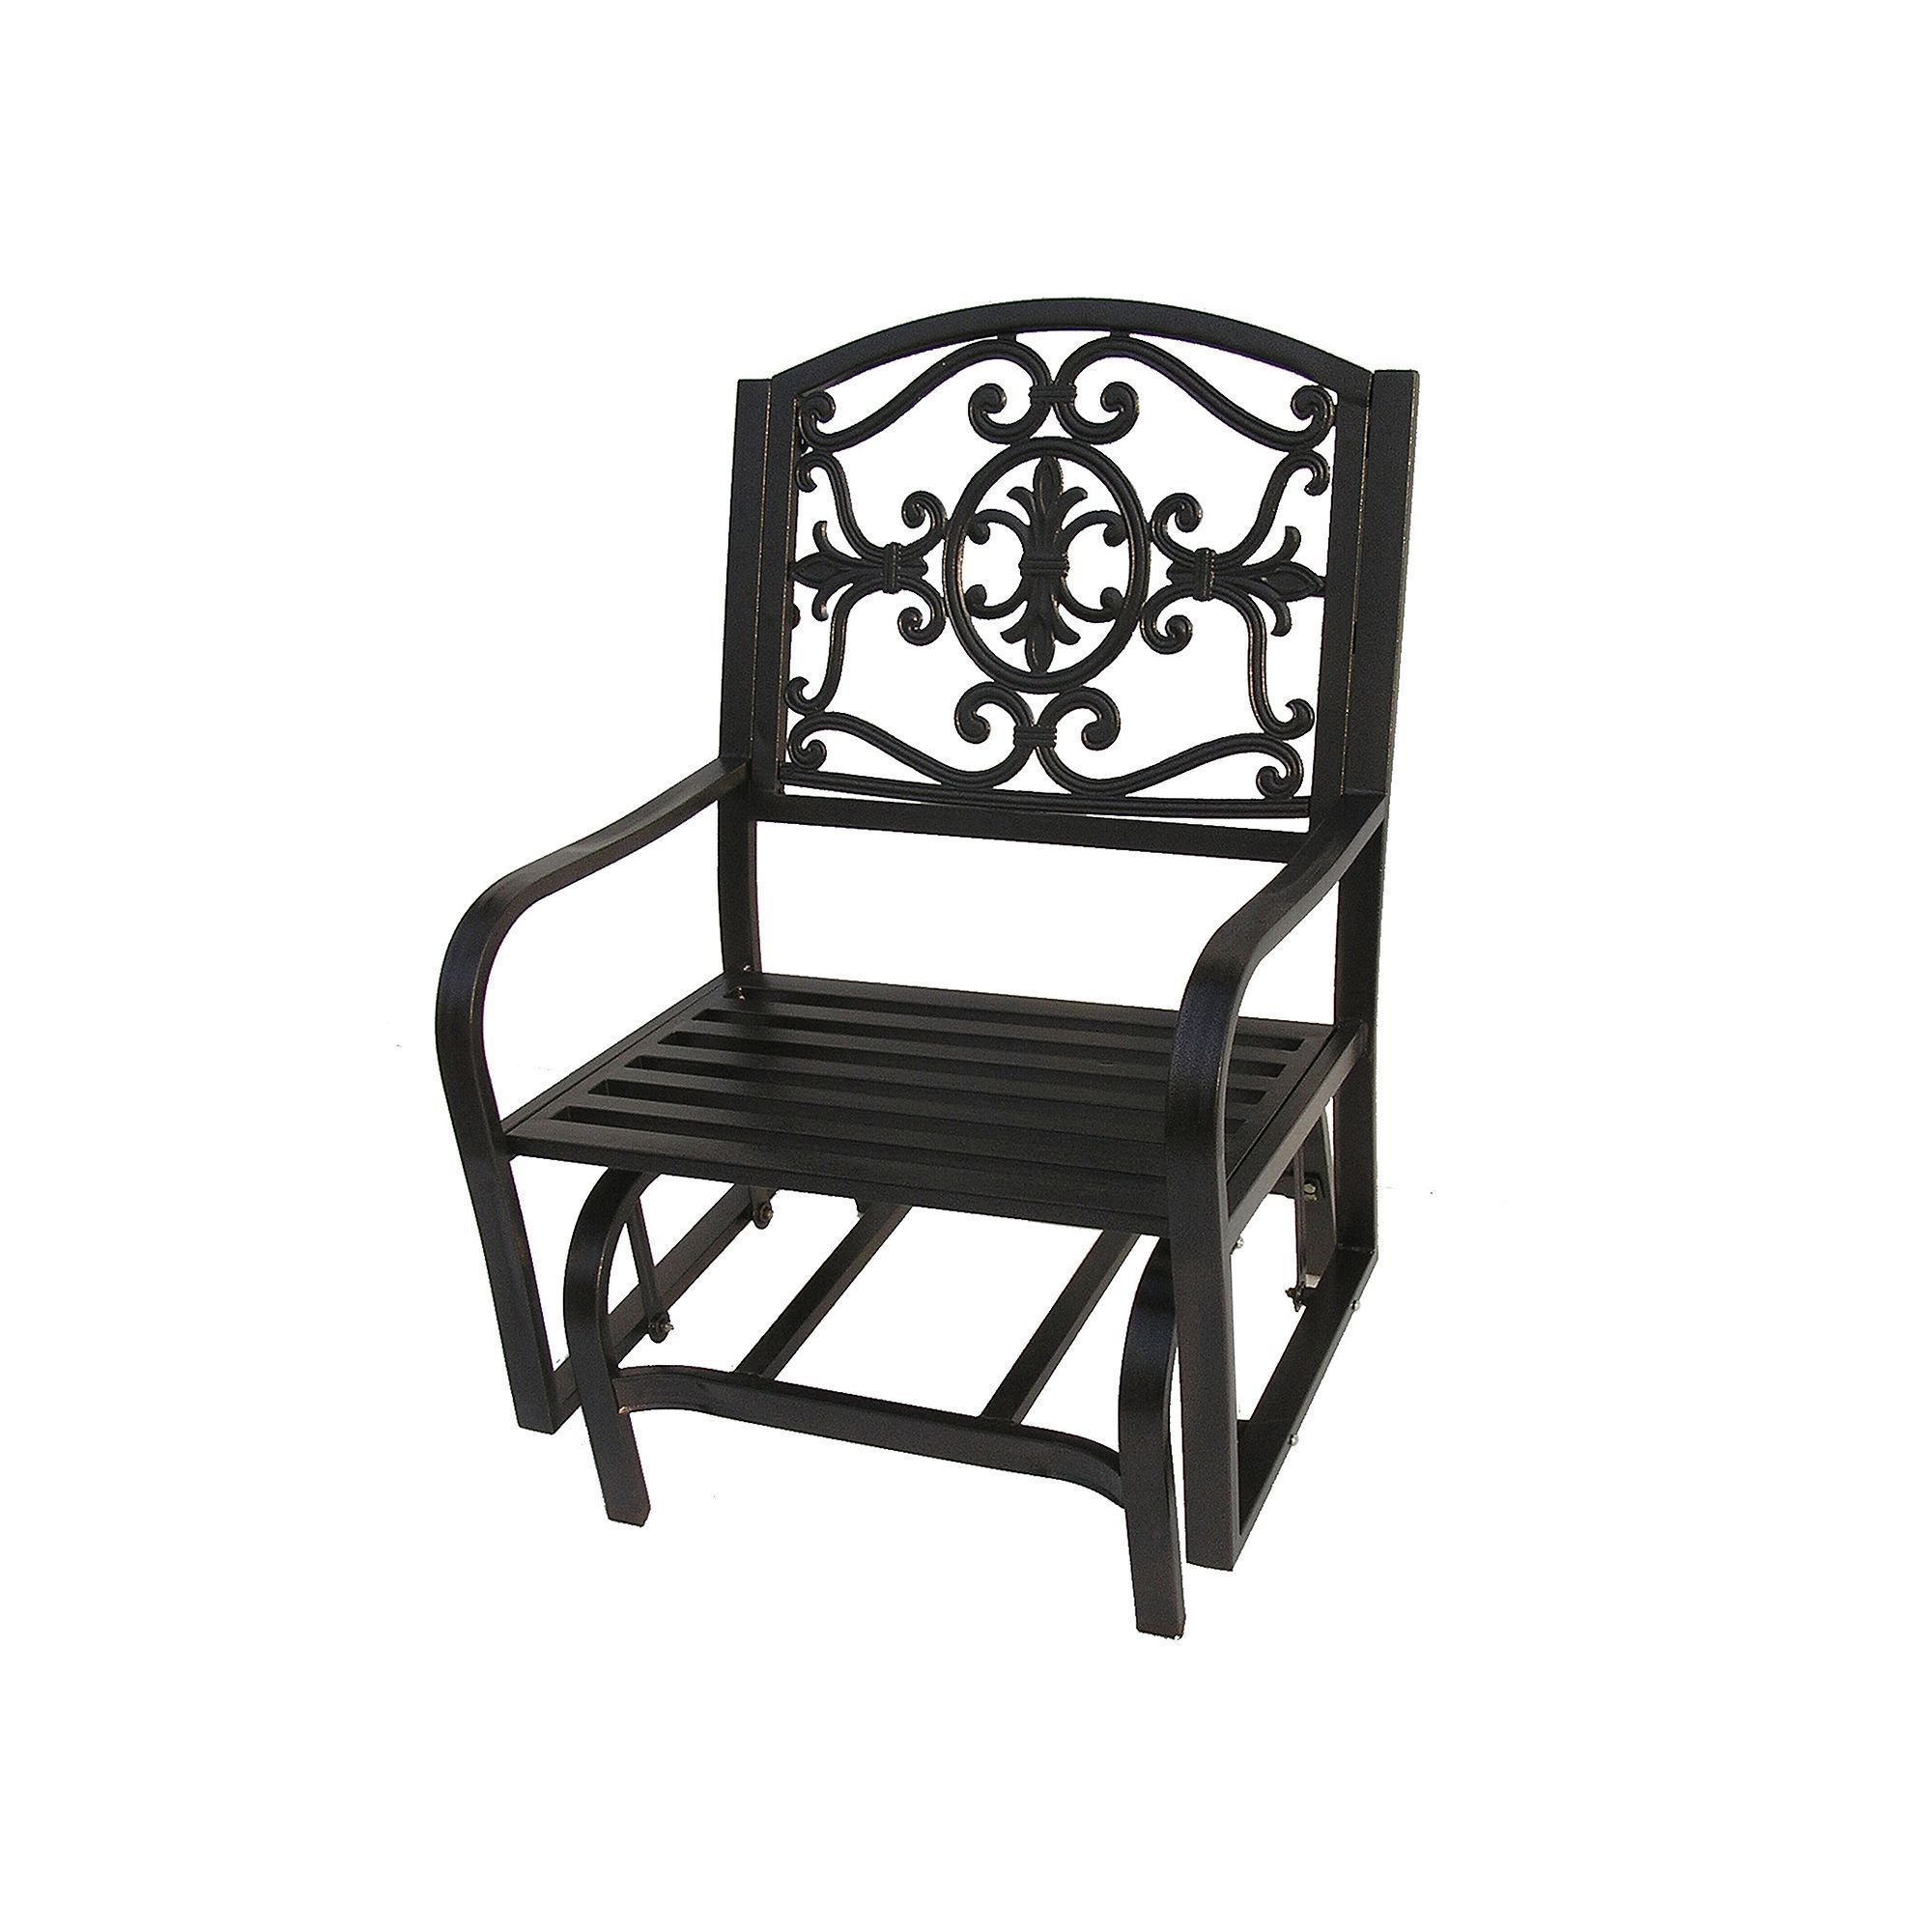 Best And Newest Black Outdoor Durable Steel Frame Patio Swing Glider Bench Chairs In Oakland Living Lakeville Patio Glider Chair (View 23 of 30)